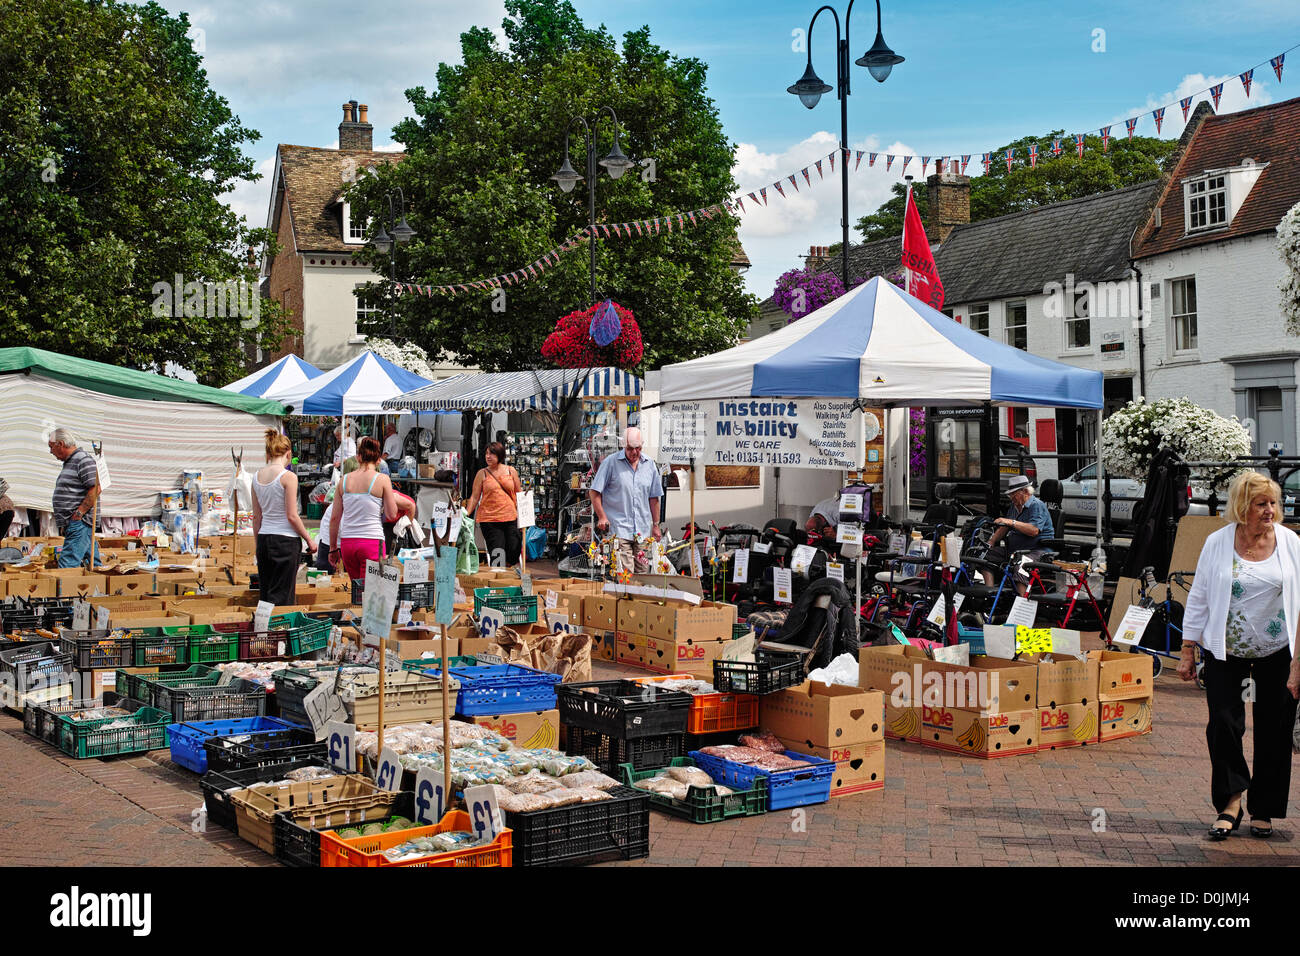 A view across stalls on Ely market place. Stock Photo